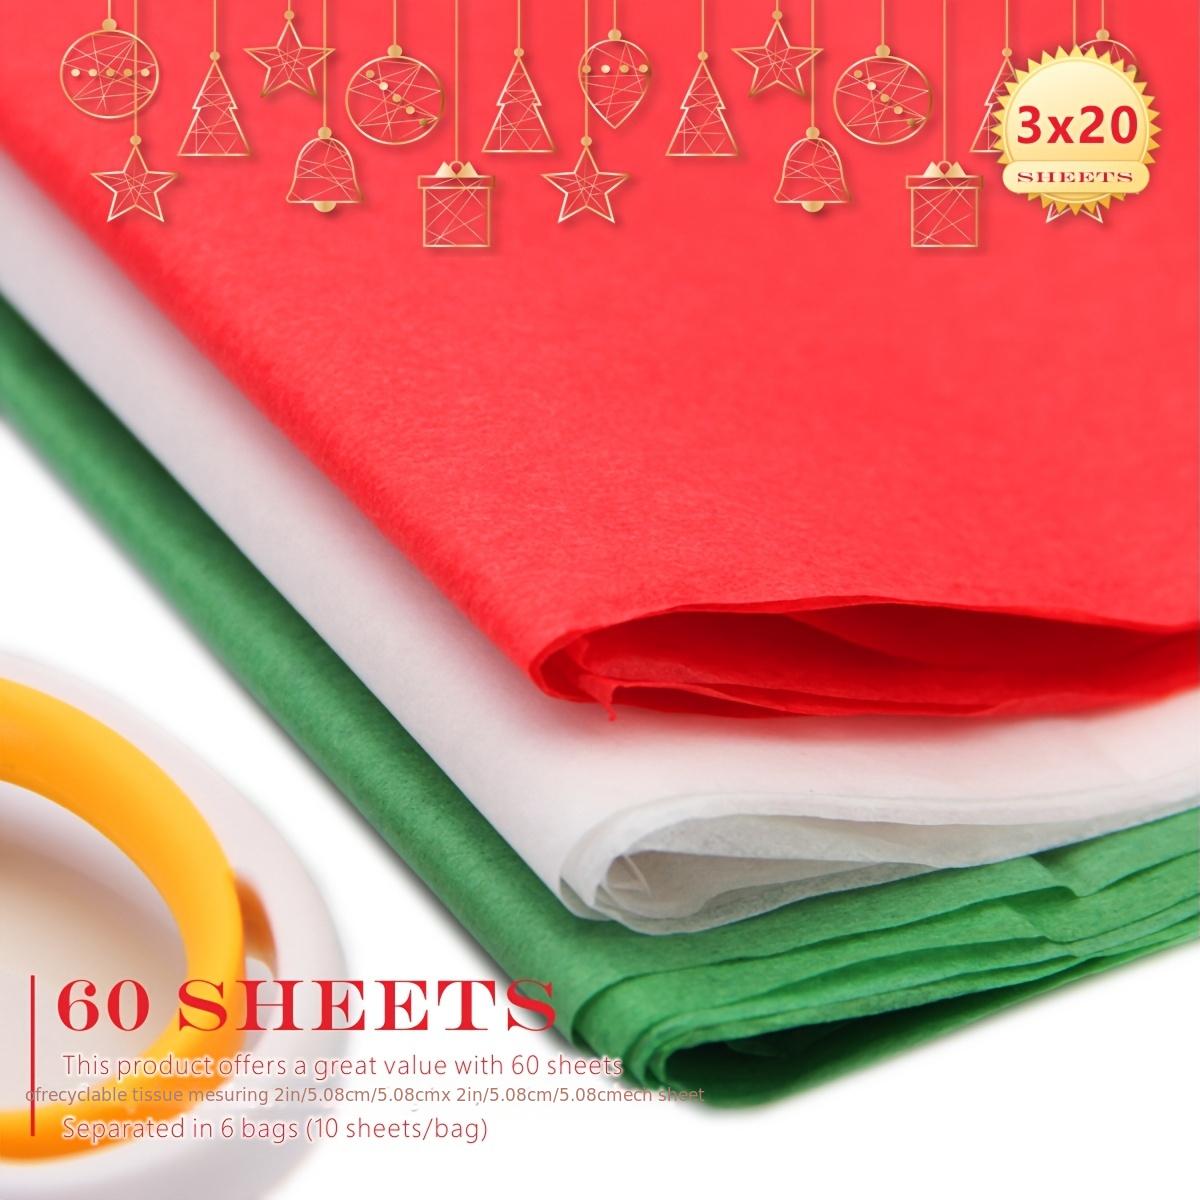 High Quality Red Tissue Paper - 20 x 26 inches, Pack of 10 Sheets